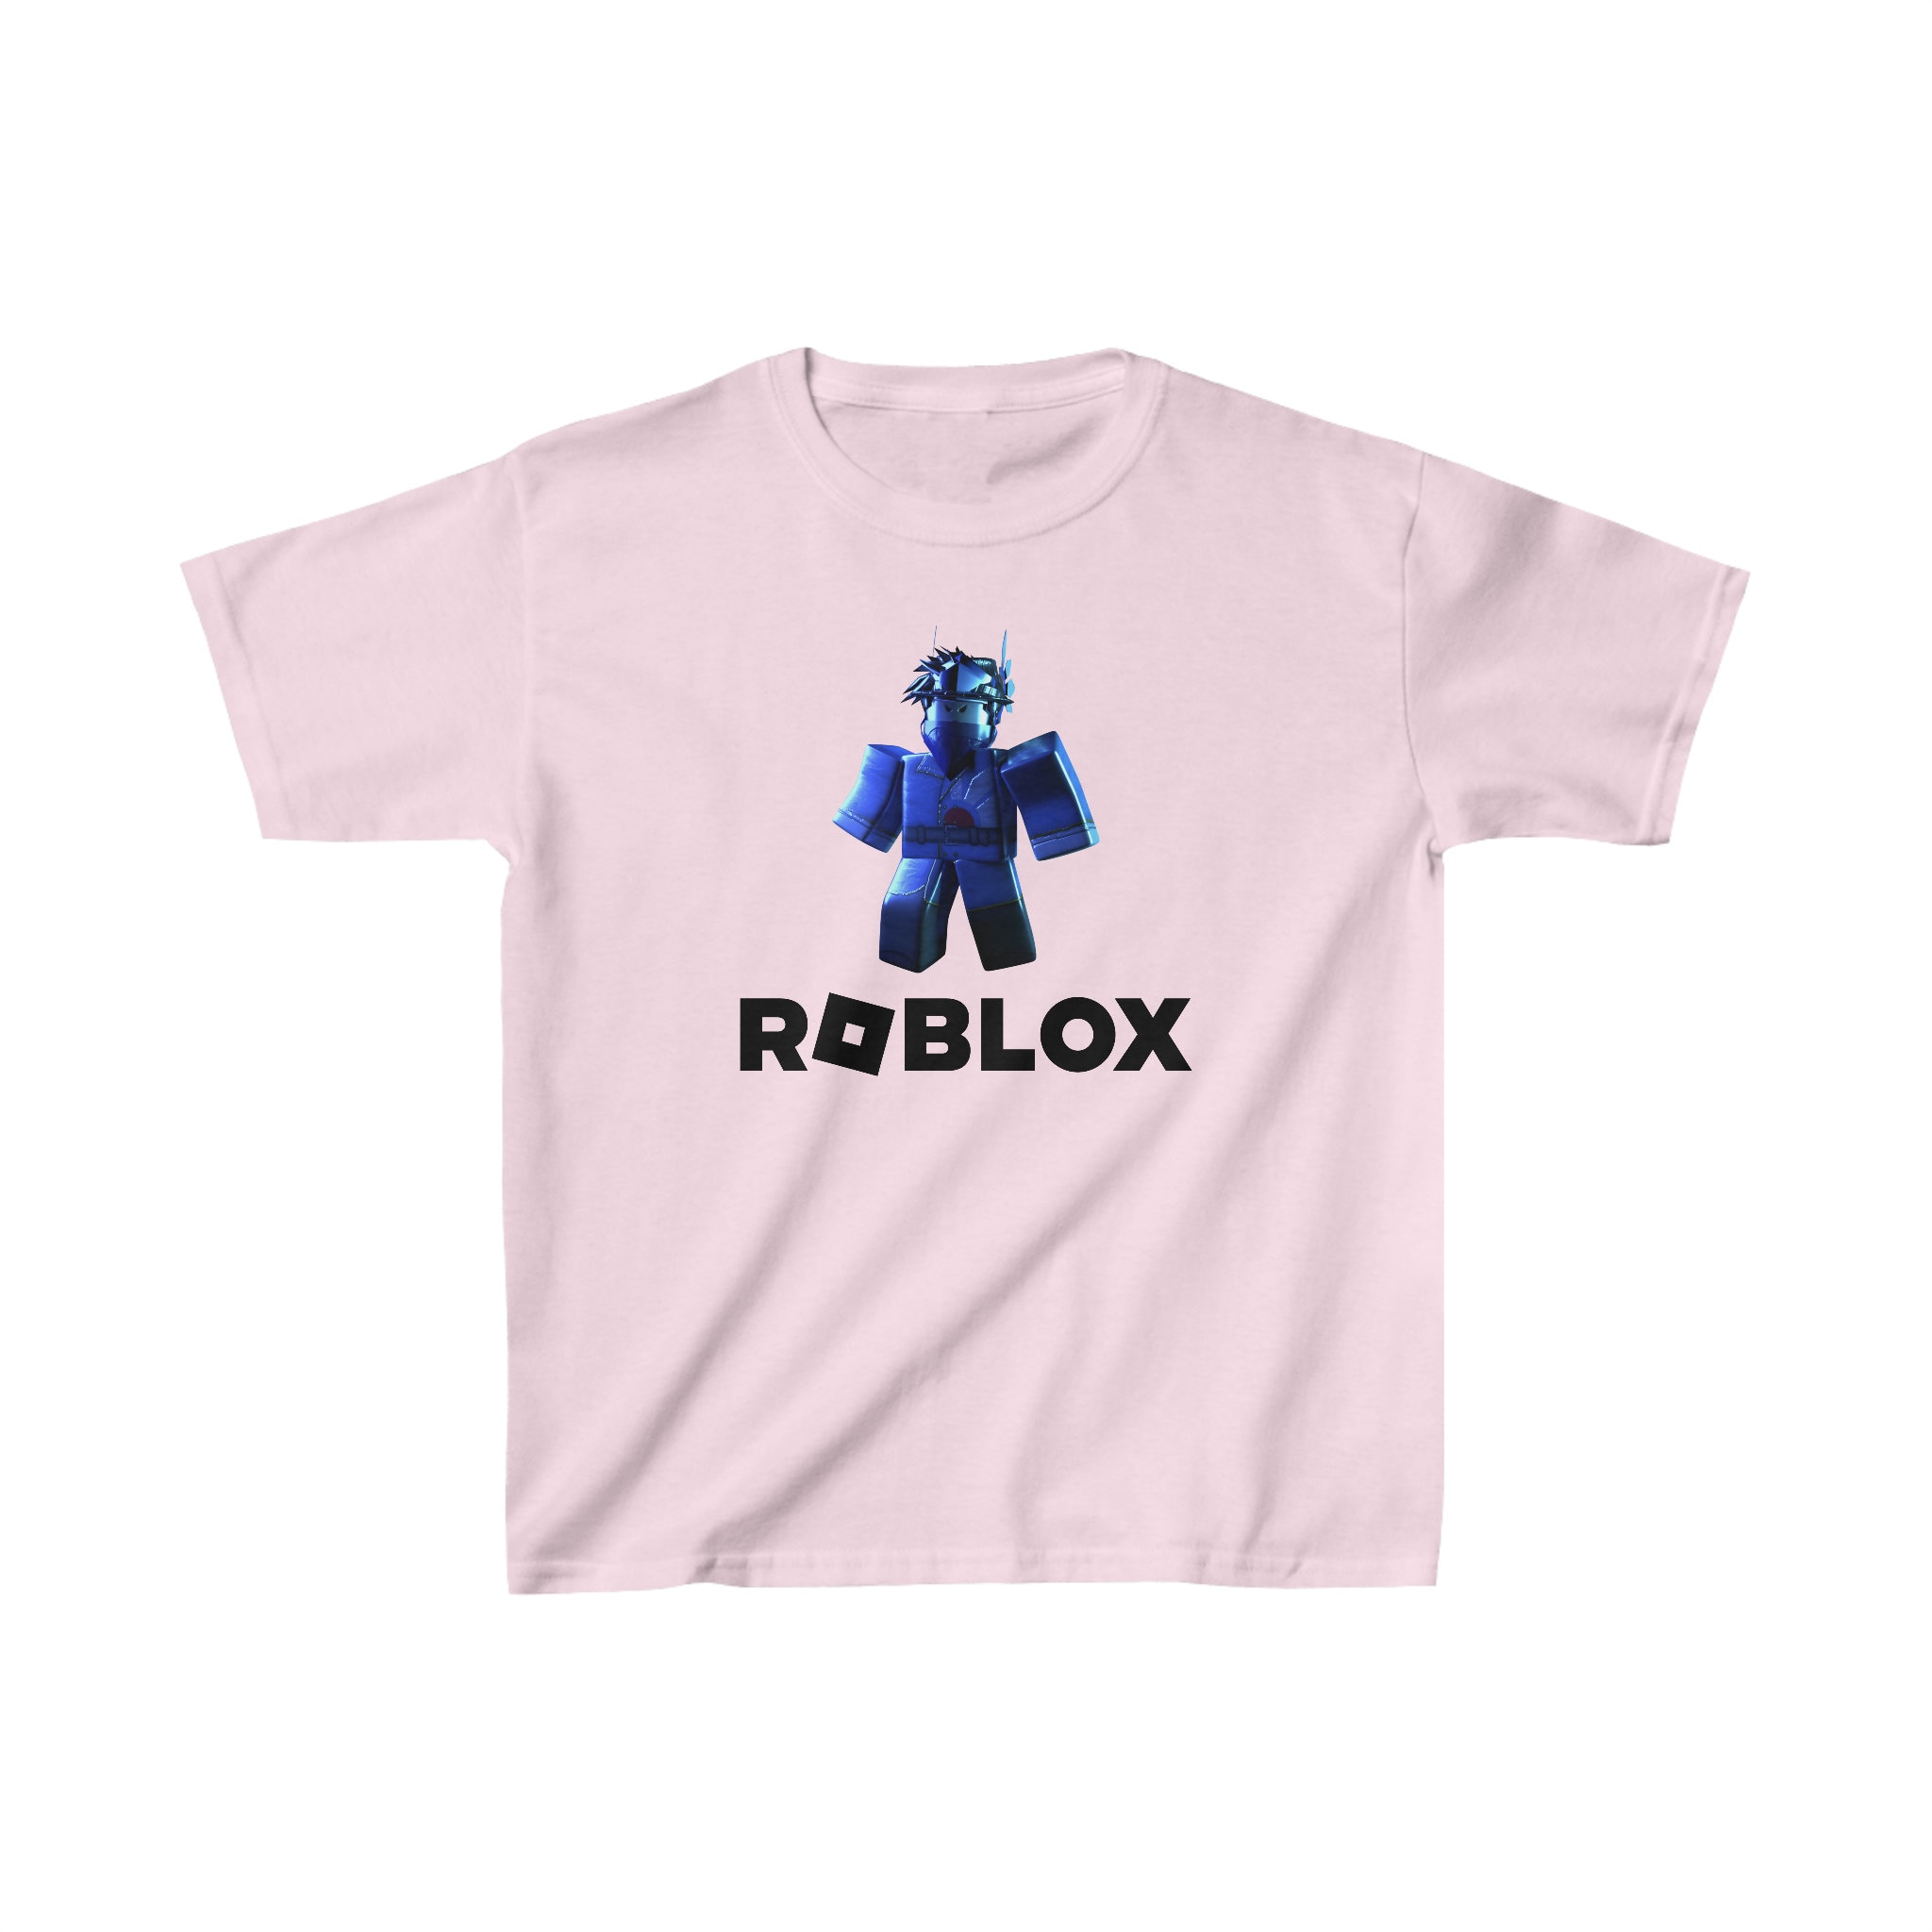 Roblox Face 4 Boy Character T-Shirt, Children Costume Shirts, Kids Outfit ~